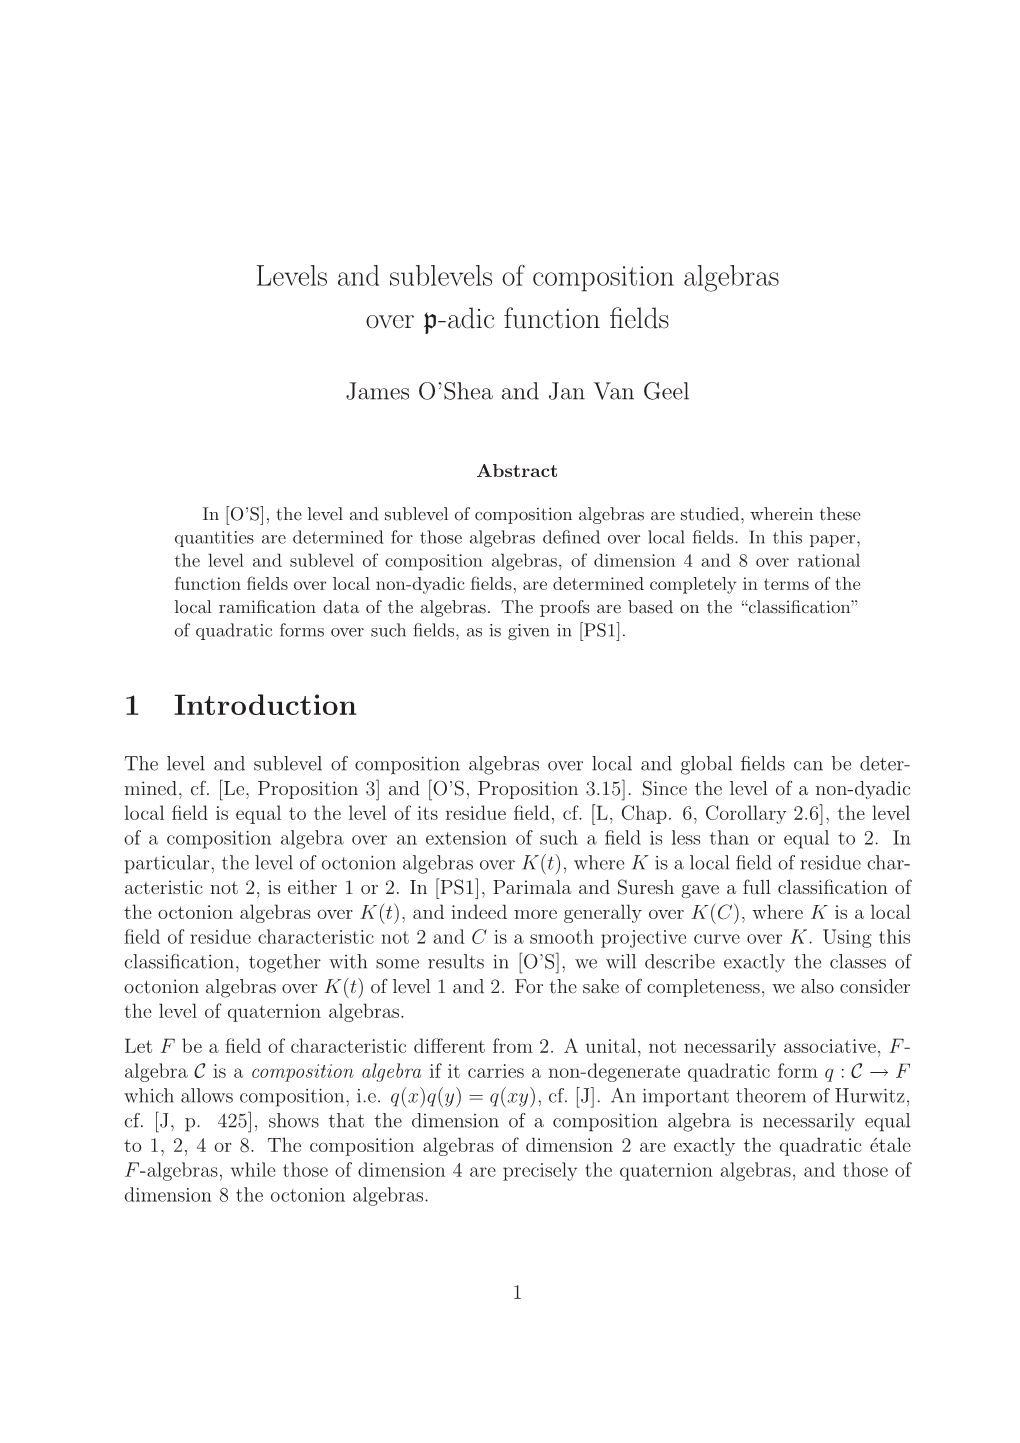 Levels and Sublevels of Composition Algebras Over P-Adic Function Fields